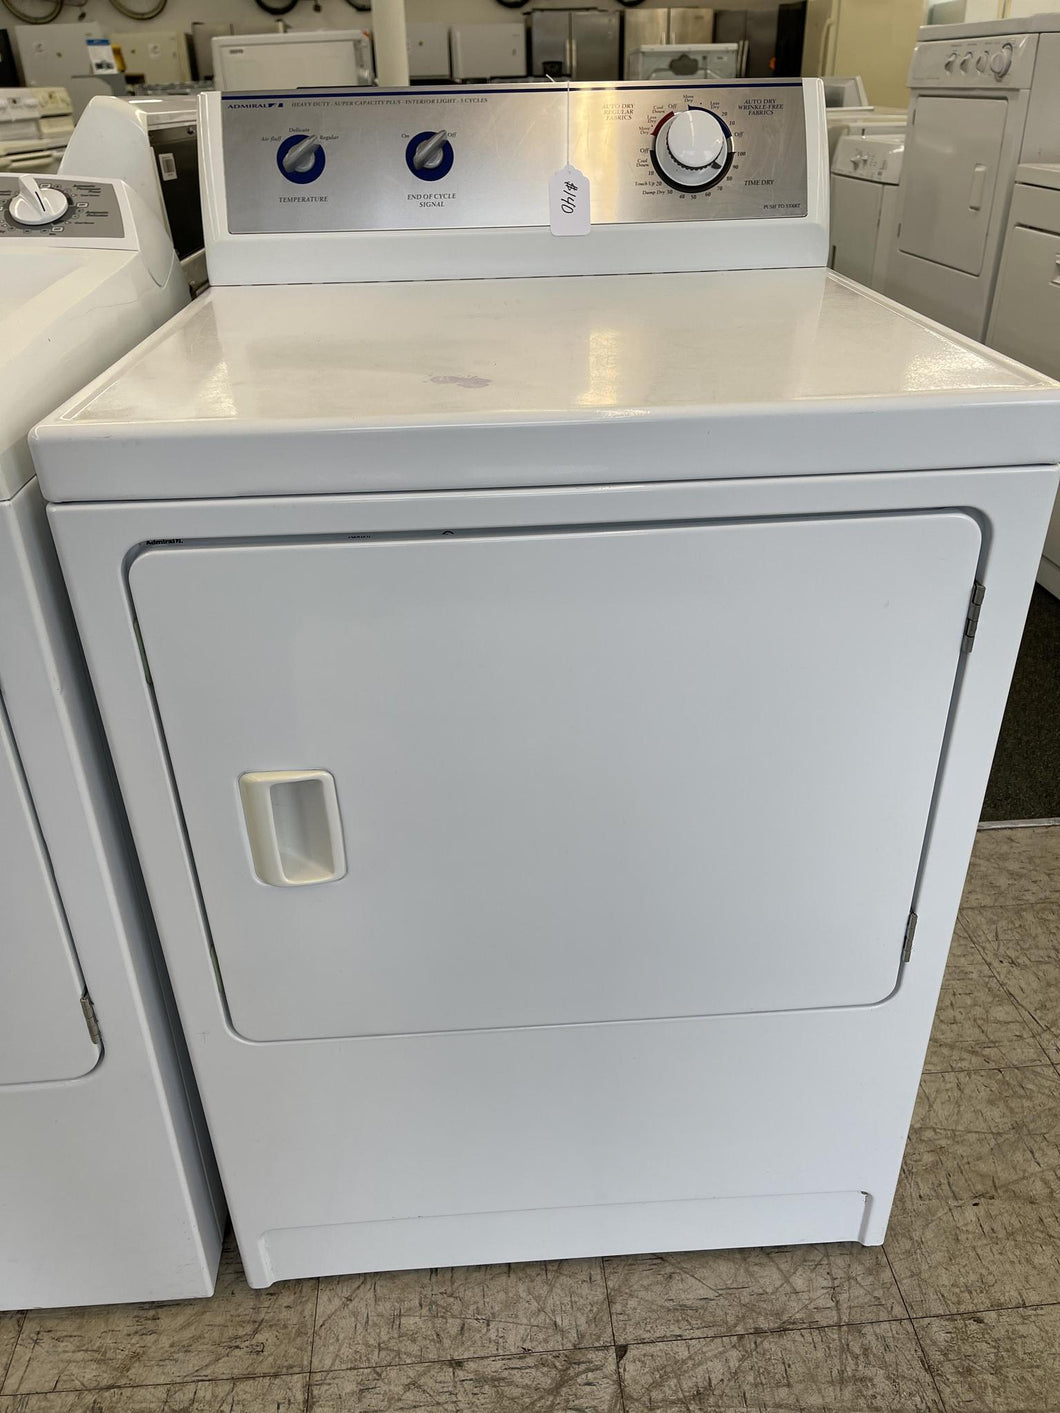 Admiral Electric Dryer - 9679